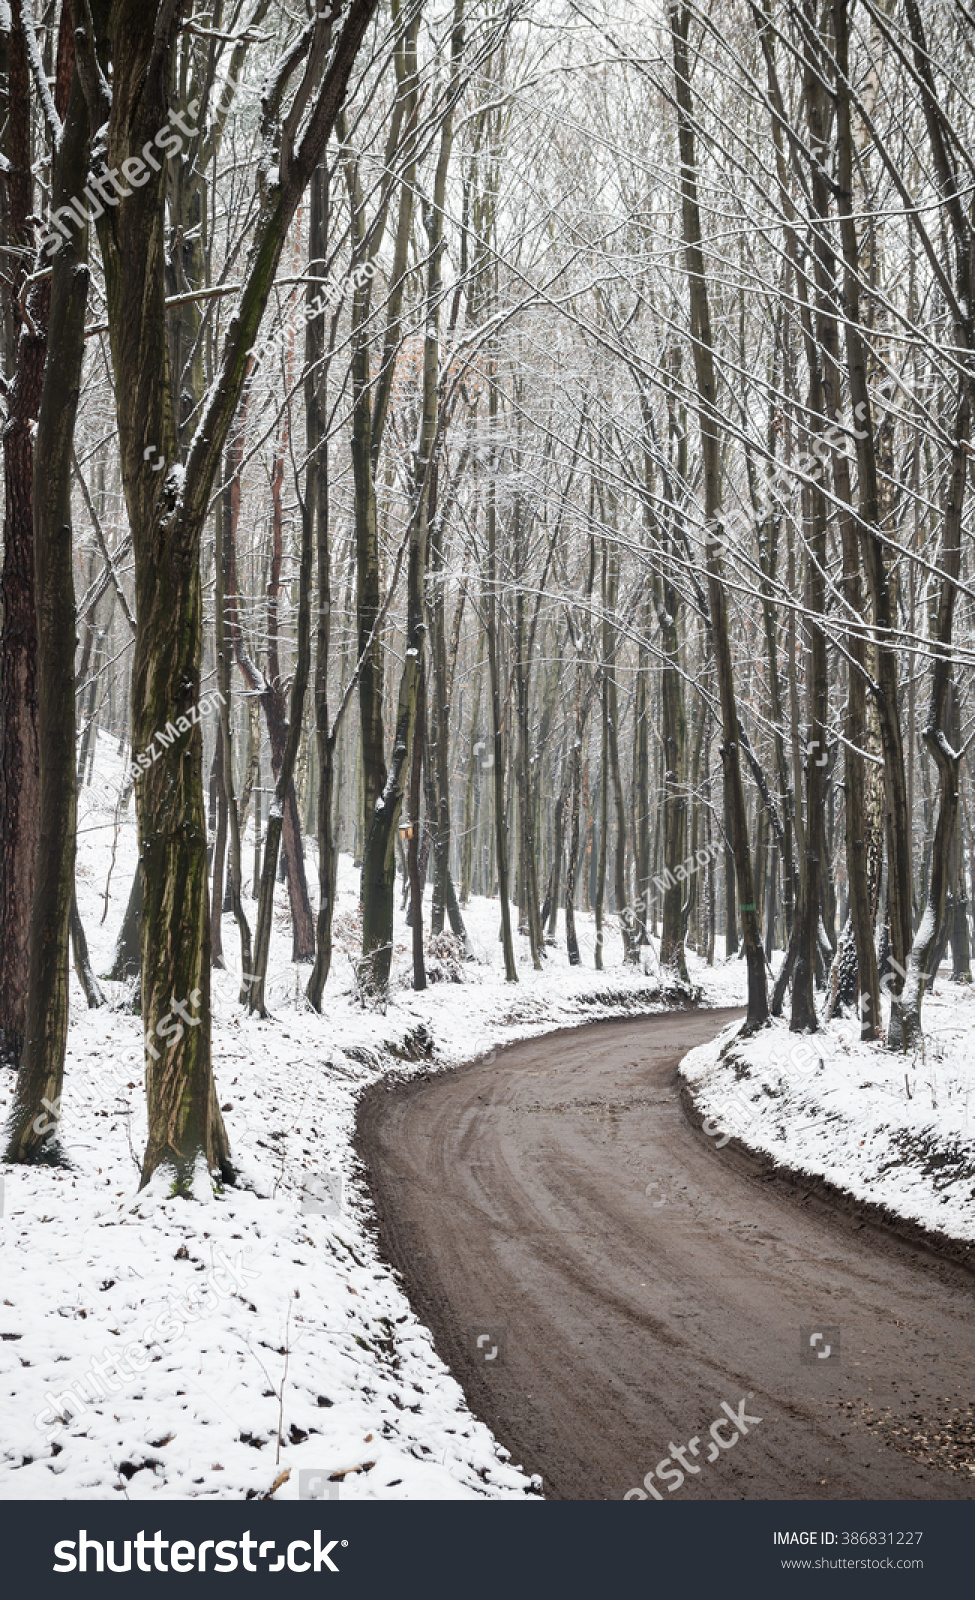 Winter forest road with dark trees, ground covered with snow #386831227